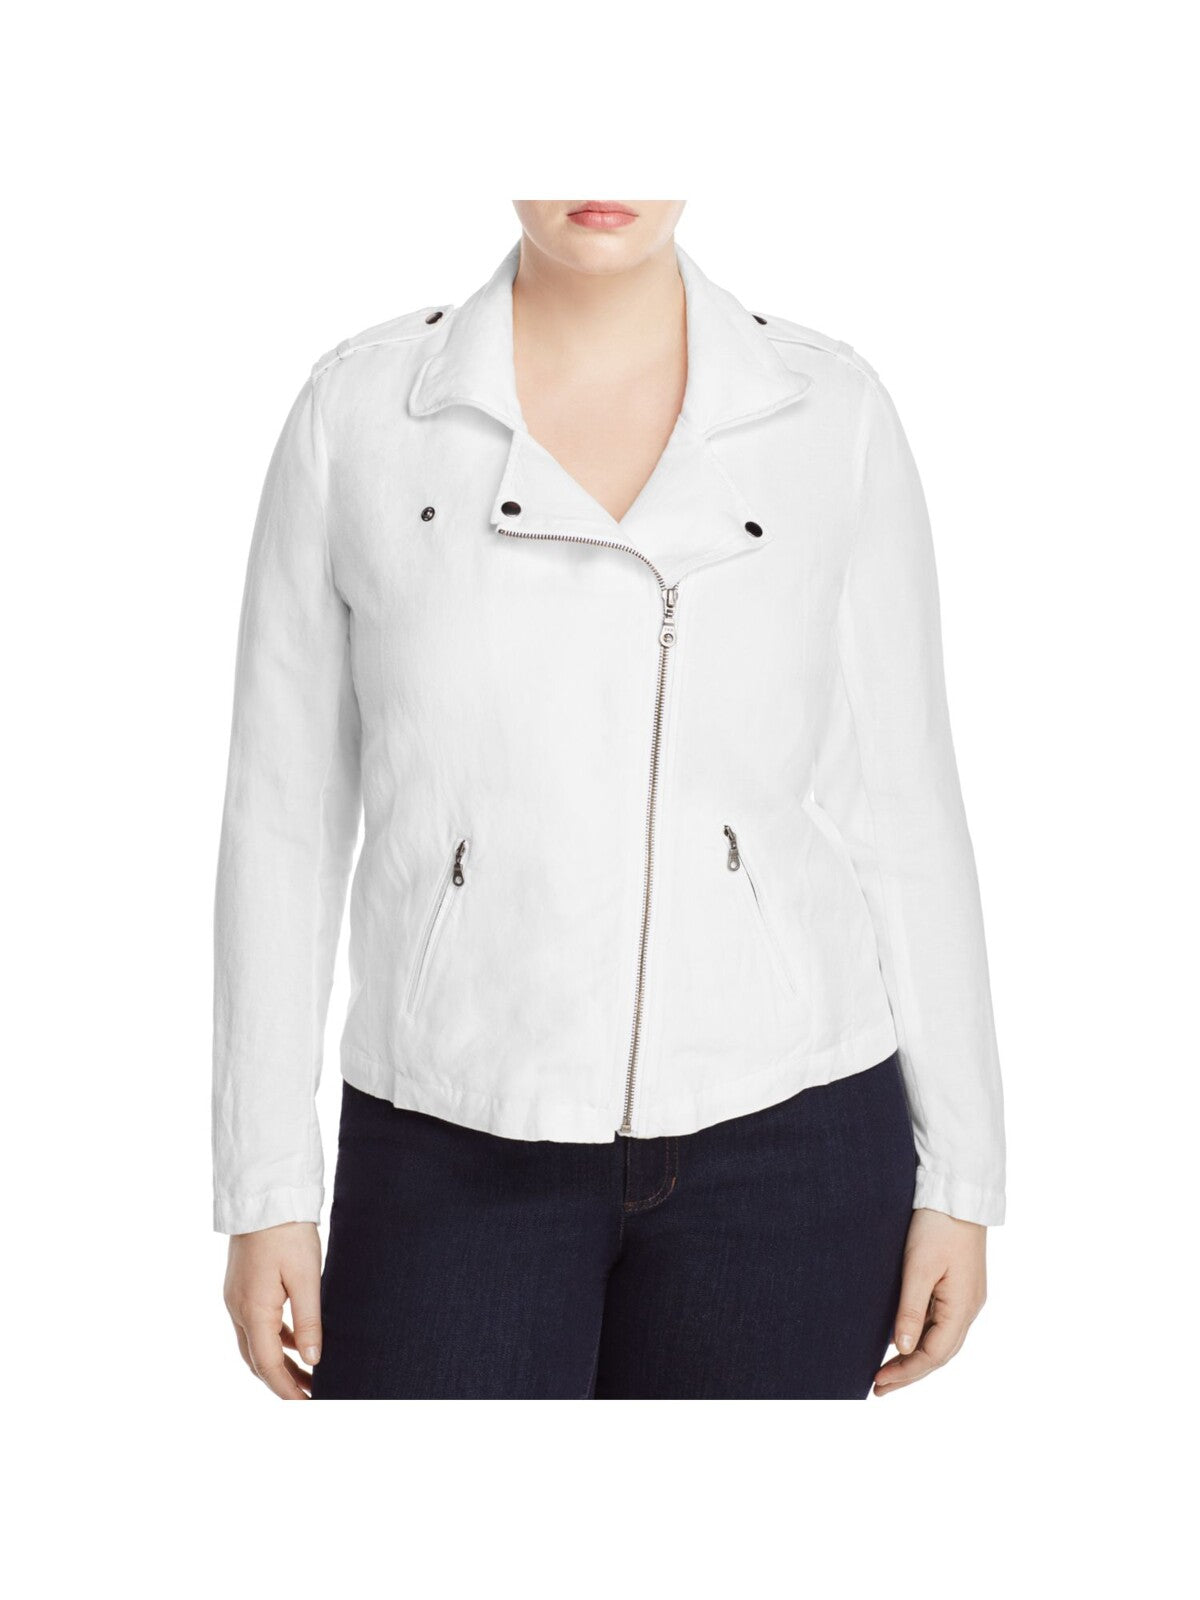 NIC+ZOE Womens White Zippered Pocketed Asymmetrical Front-zip Closure Motorcycle Jacket Plus 2X